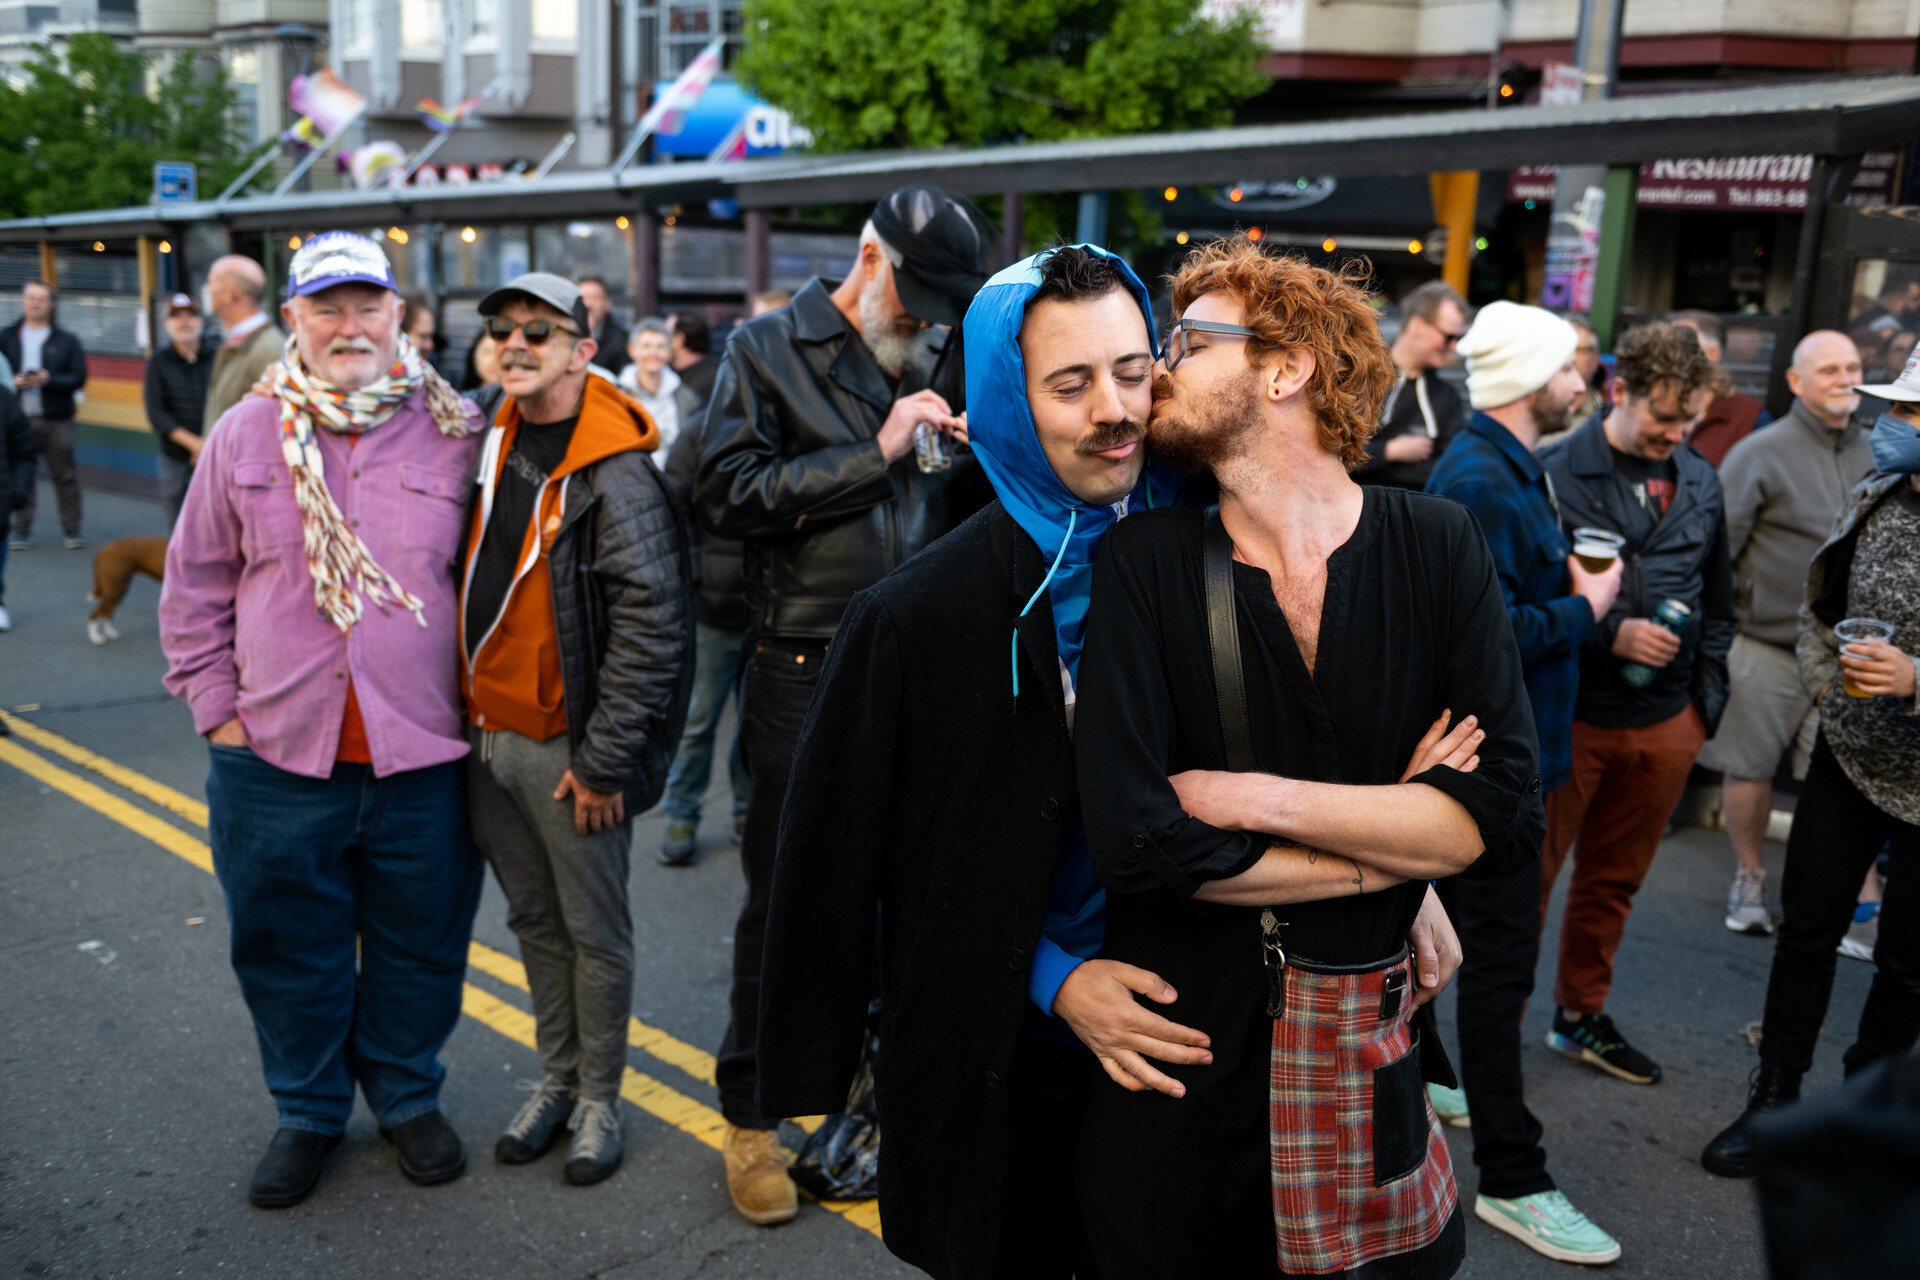 A large crowd stands on Castro Street in front of Castro Theater, and in the middle of the crowed, a young couple hugs and kisses.